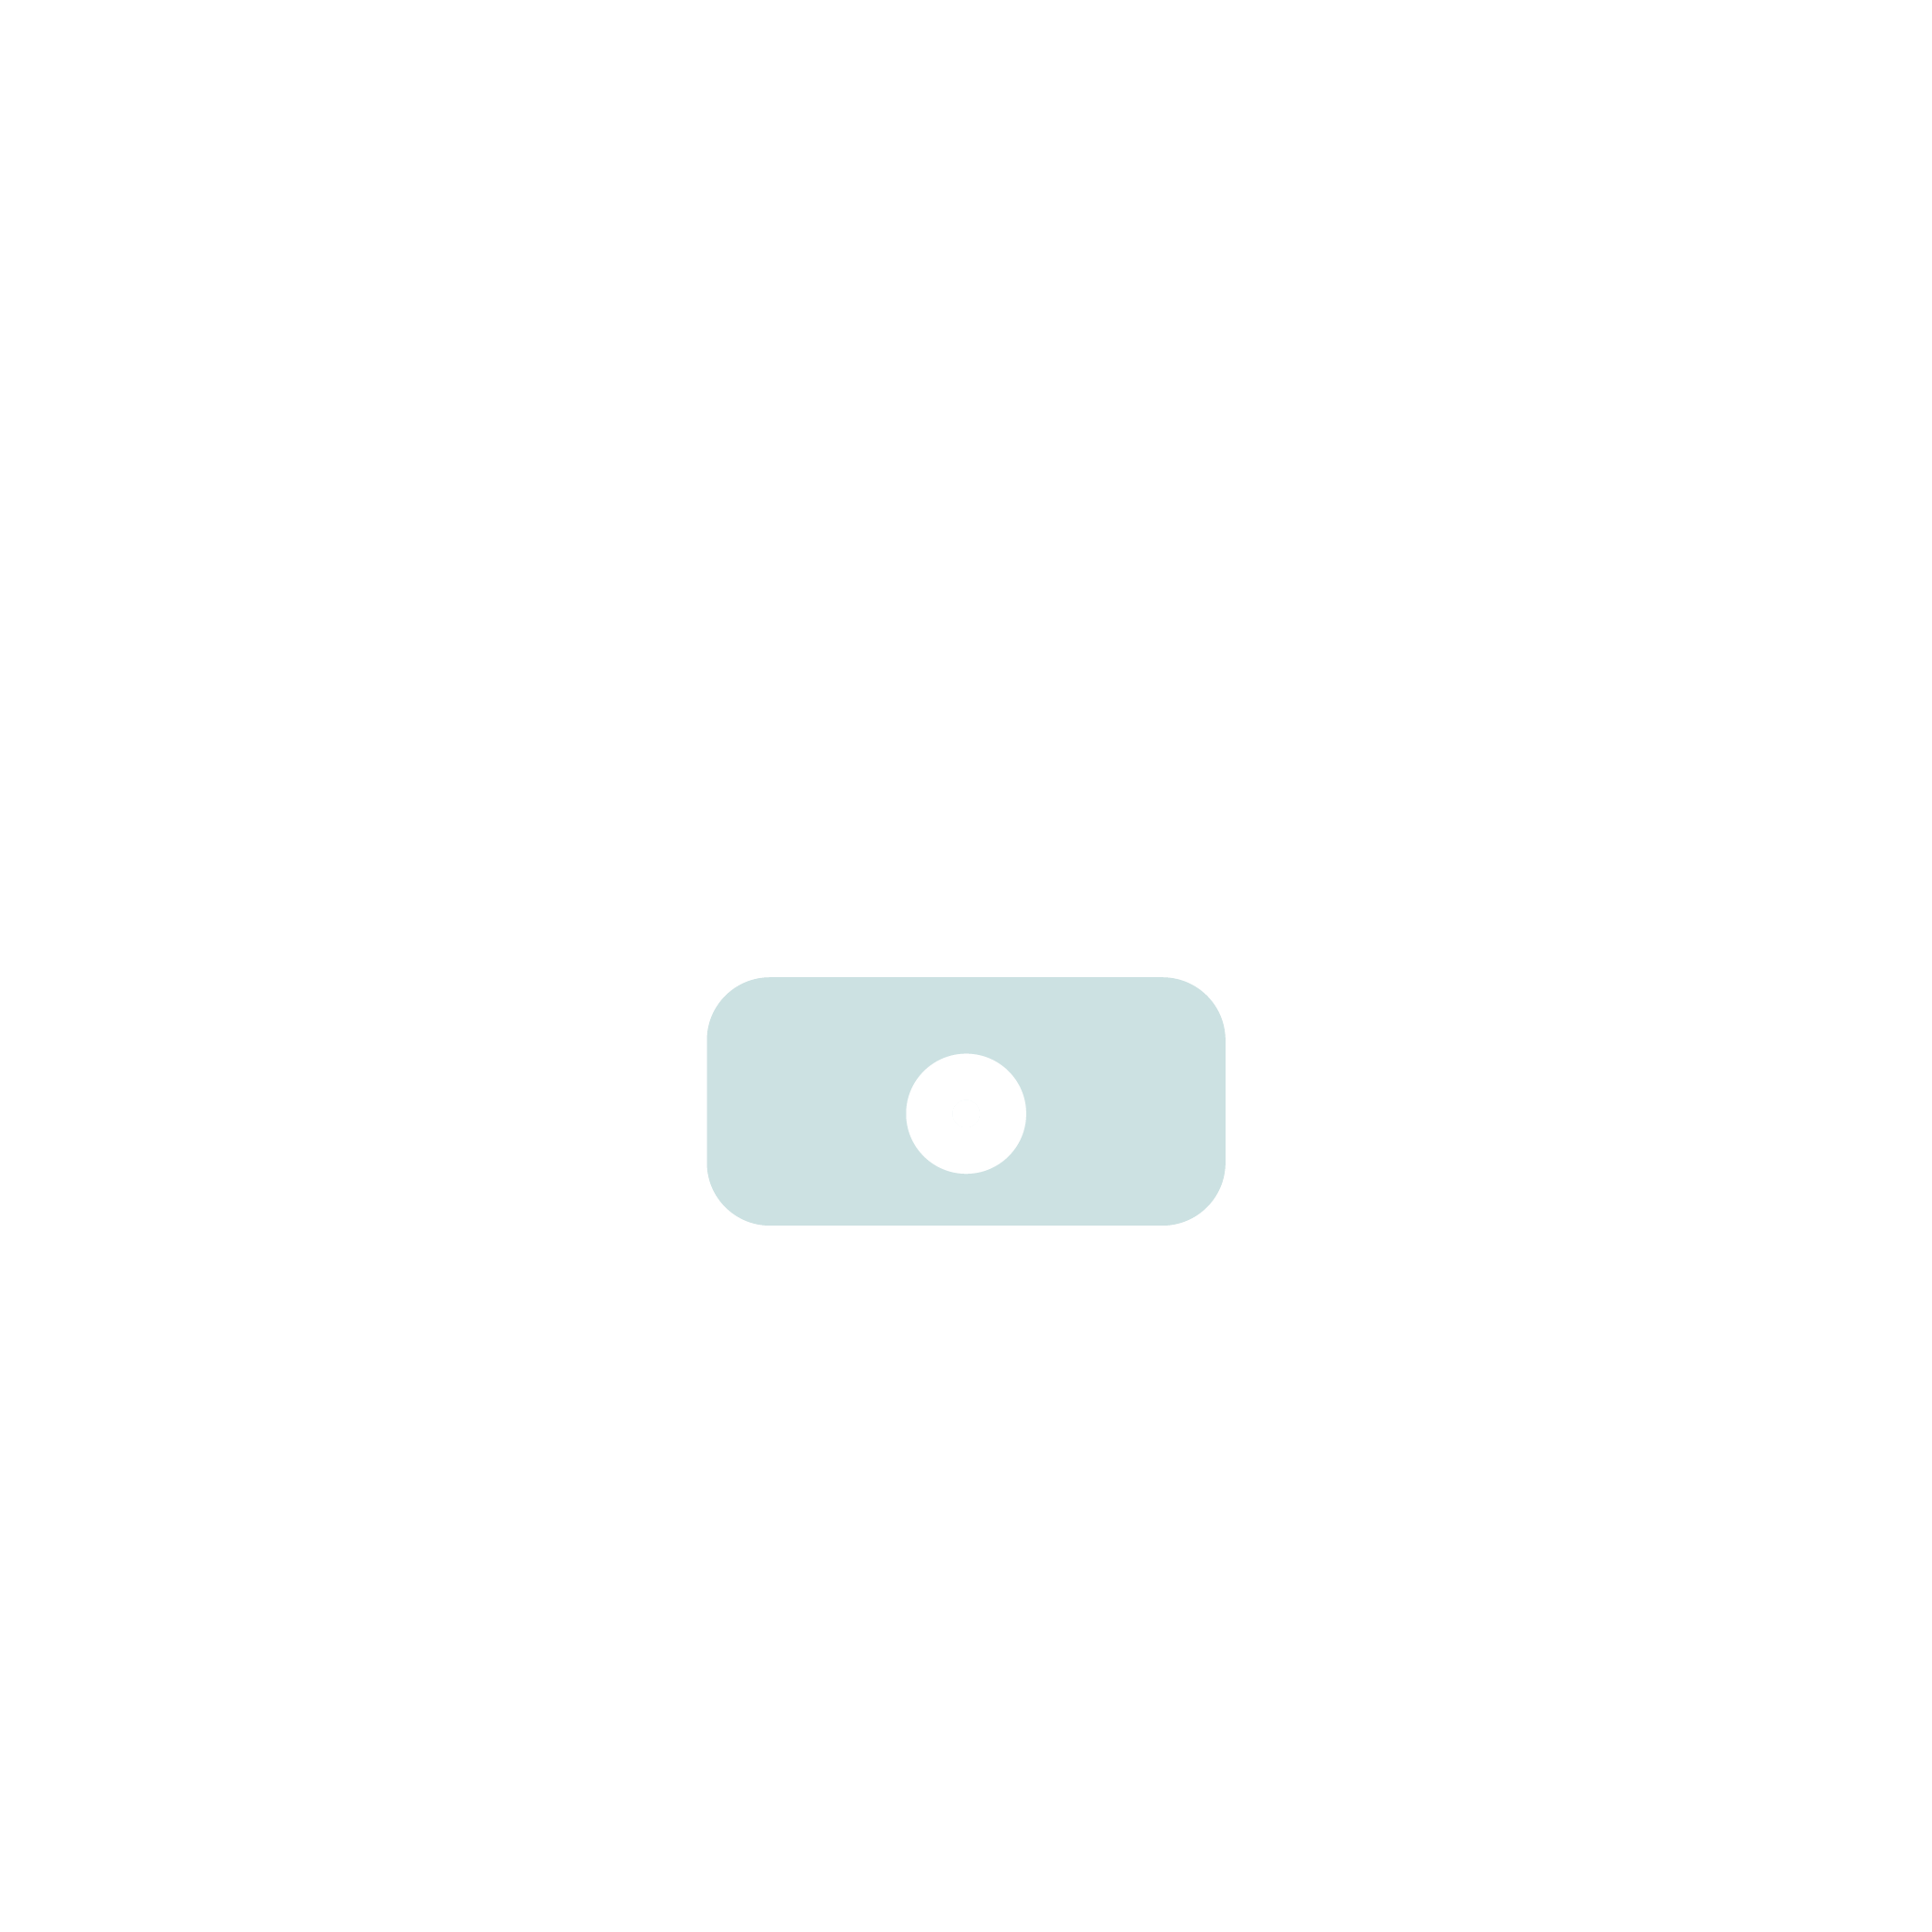 an icon of a white padlock inside a shield with transparent background